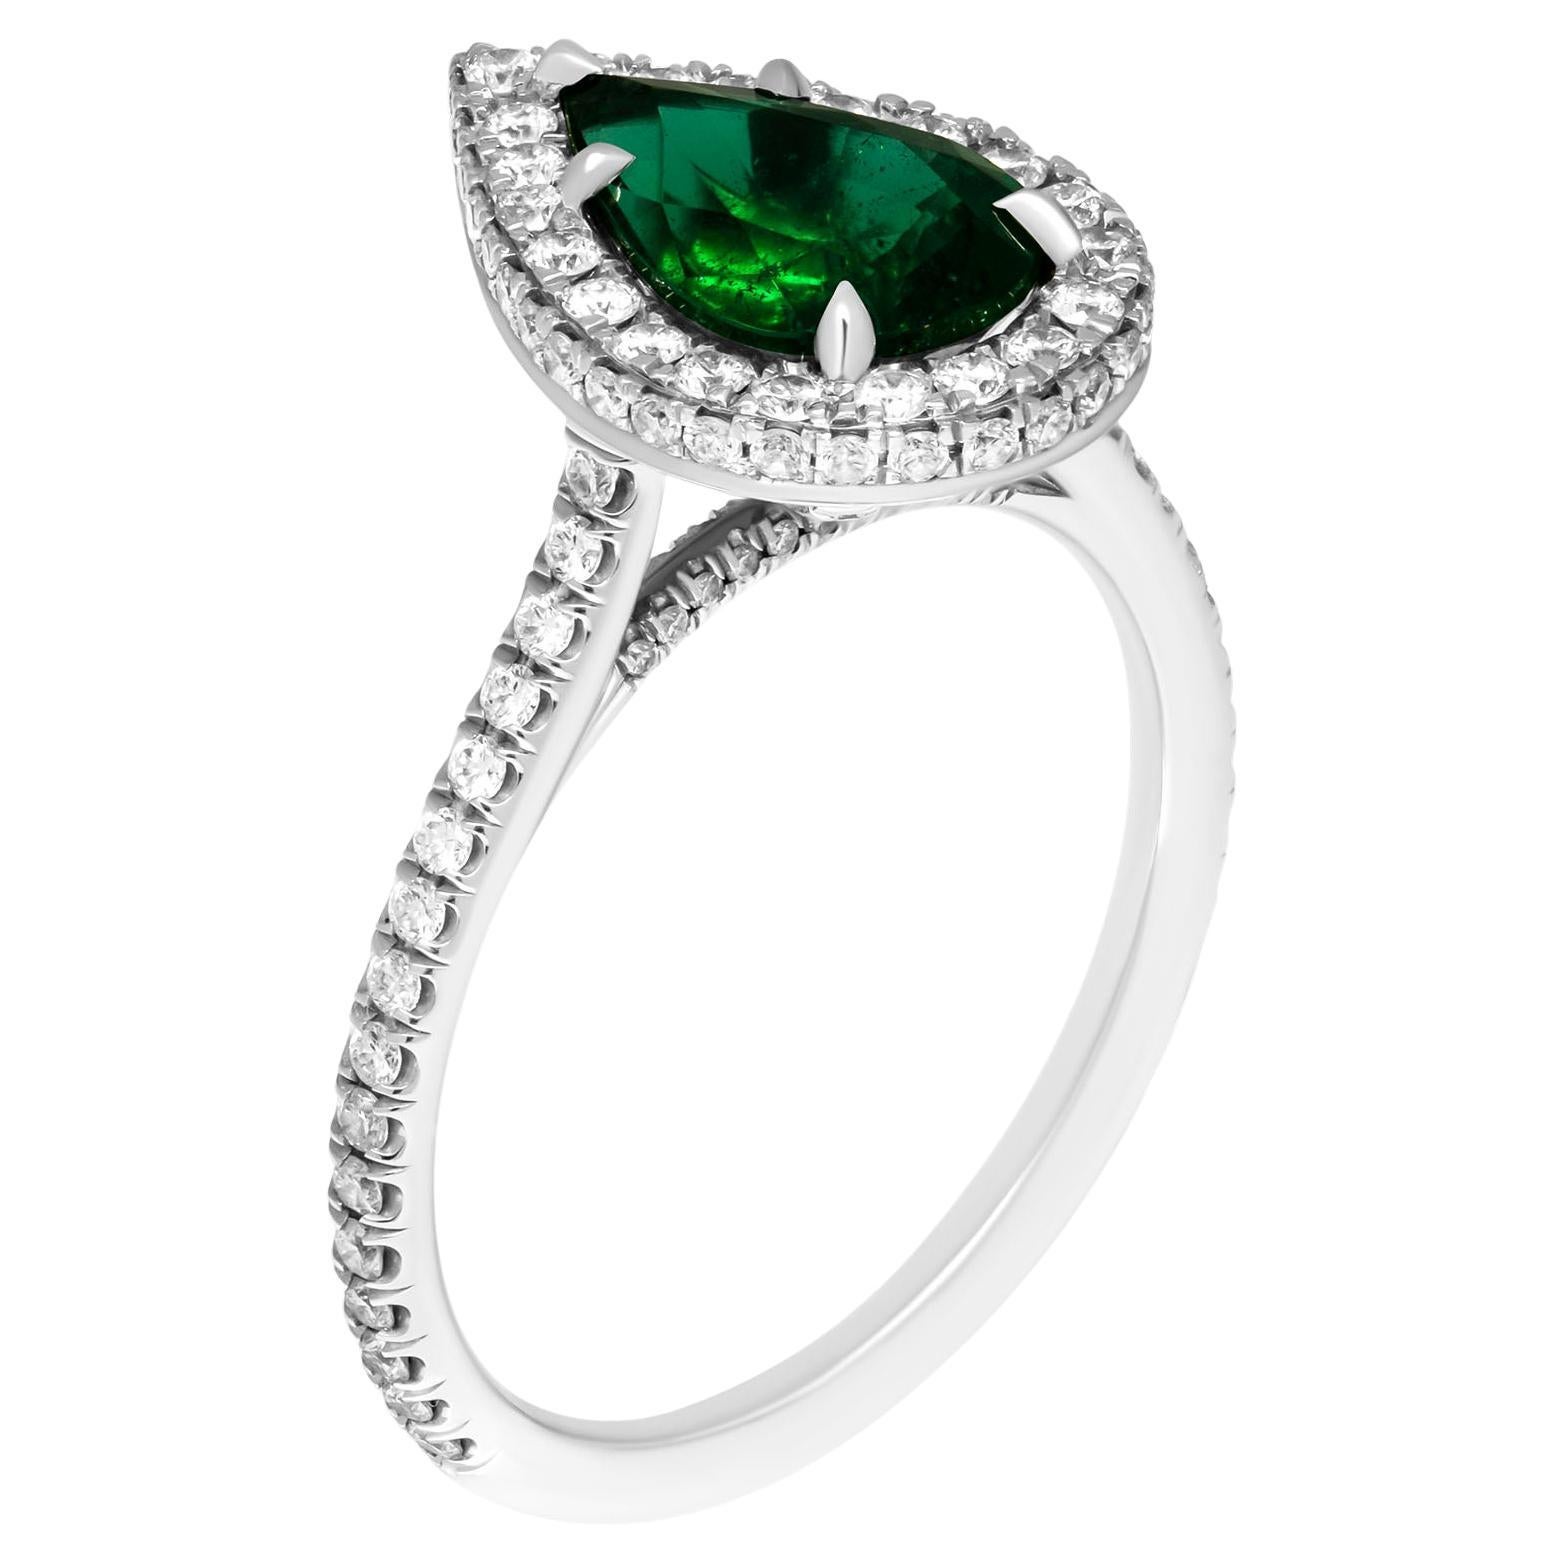 GIA Certified Cocktail Ring with 1.83 Carat Pear Shaped Green Emerald For Sale